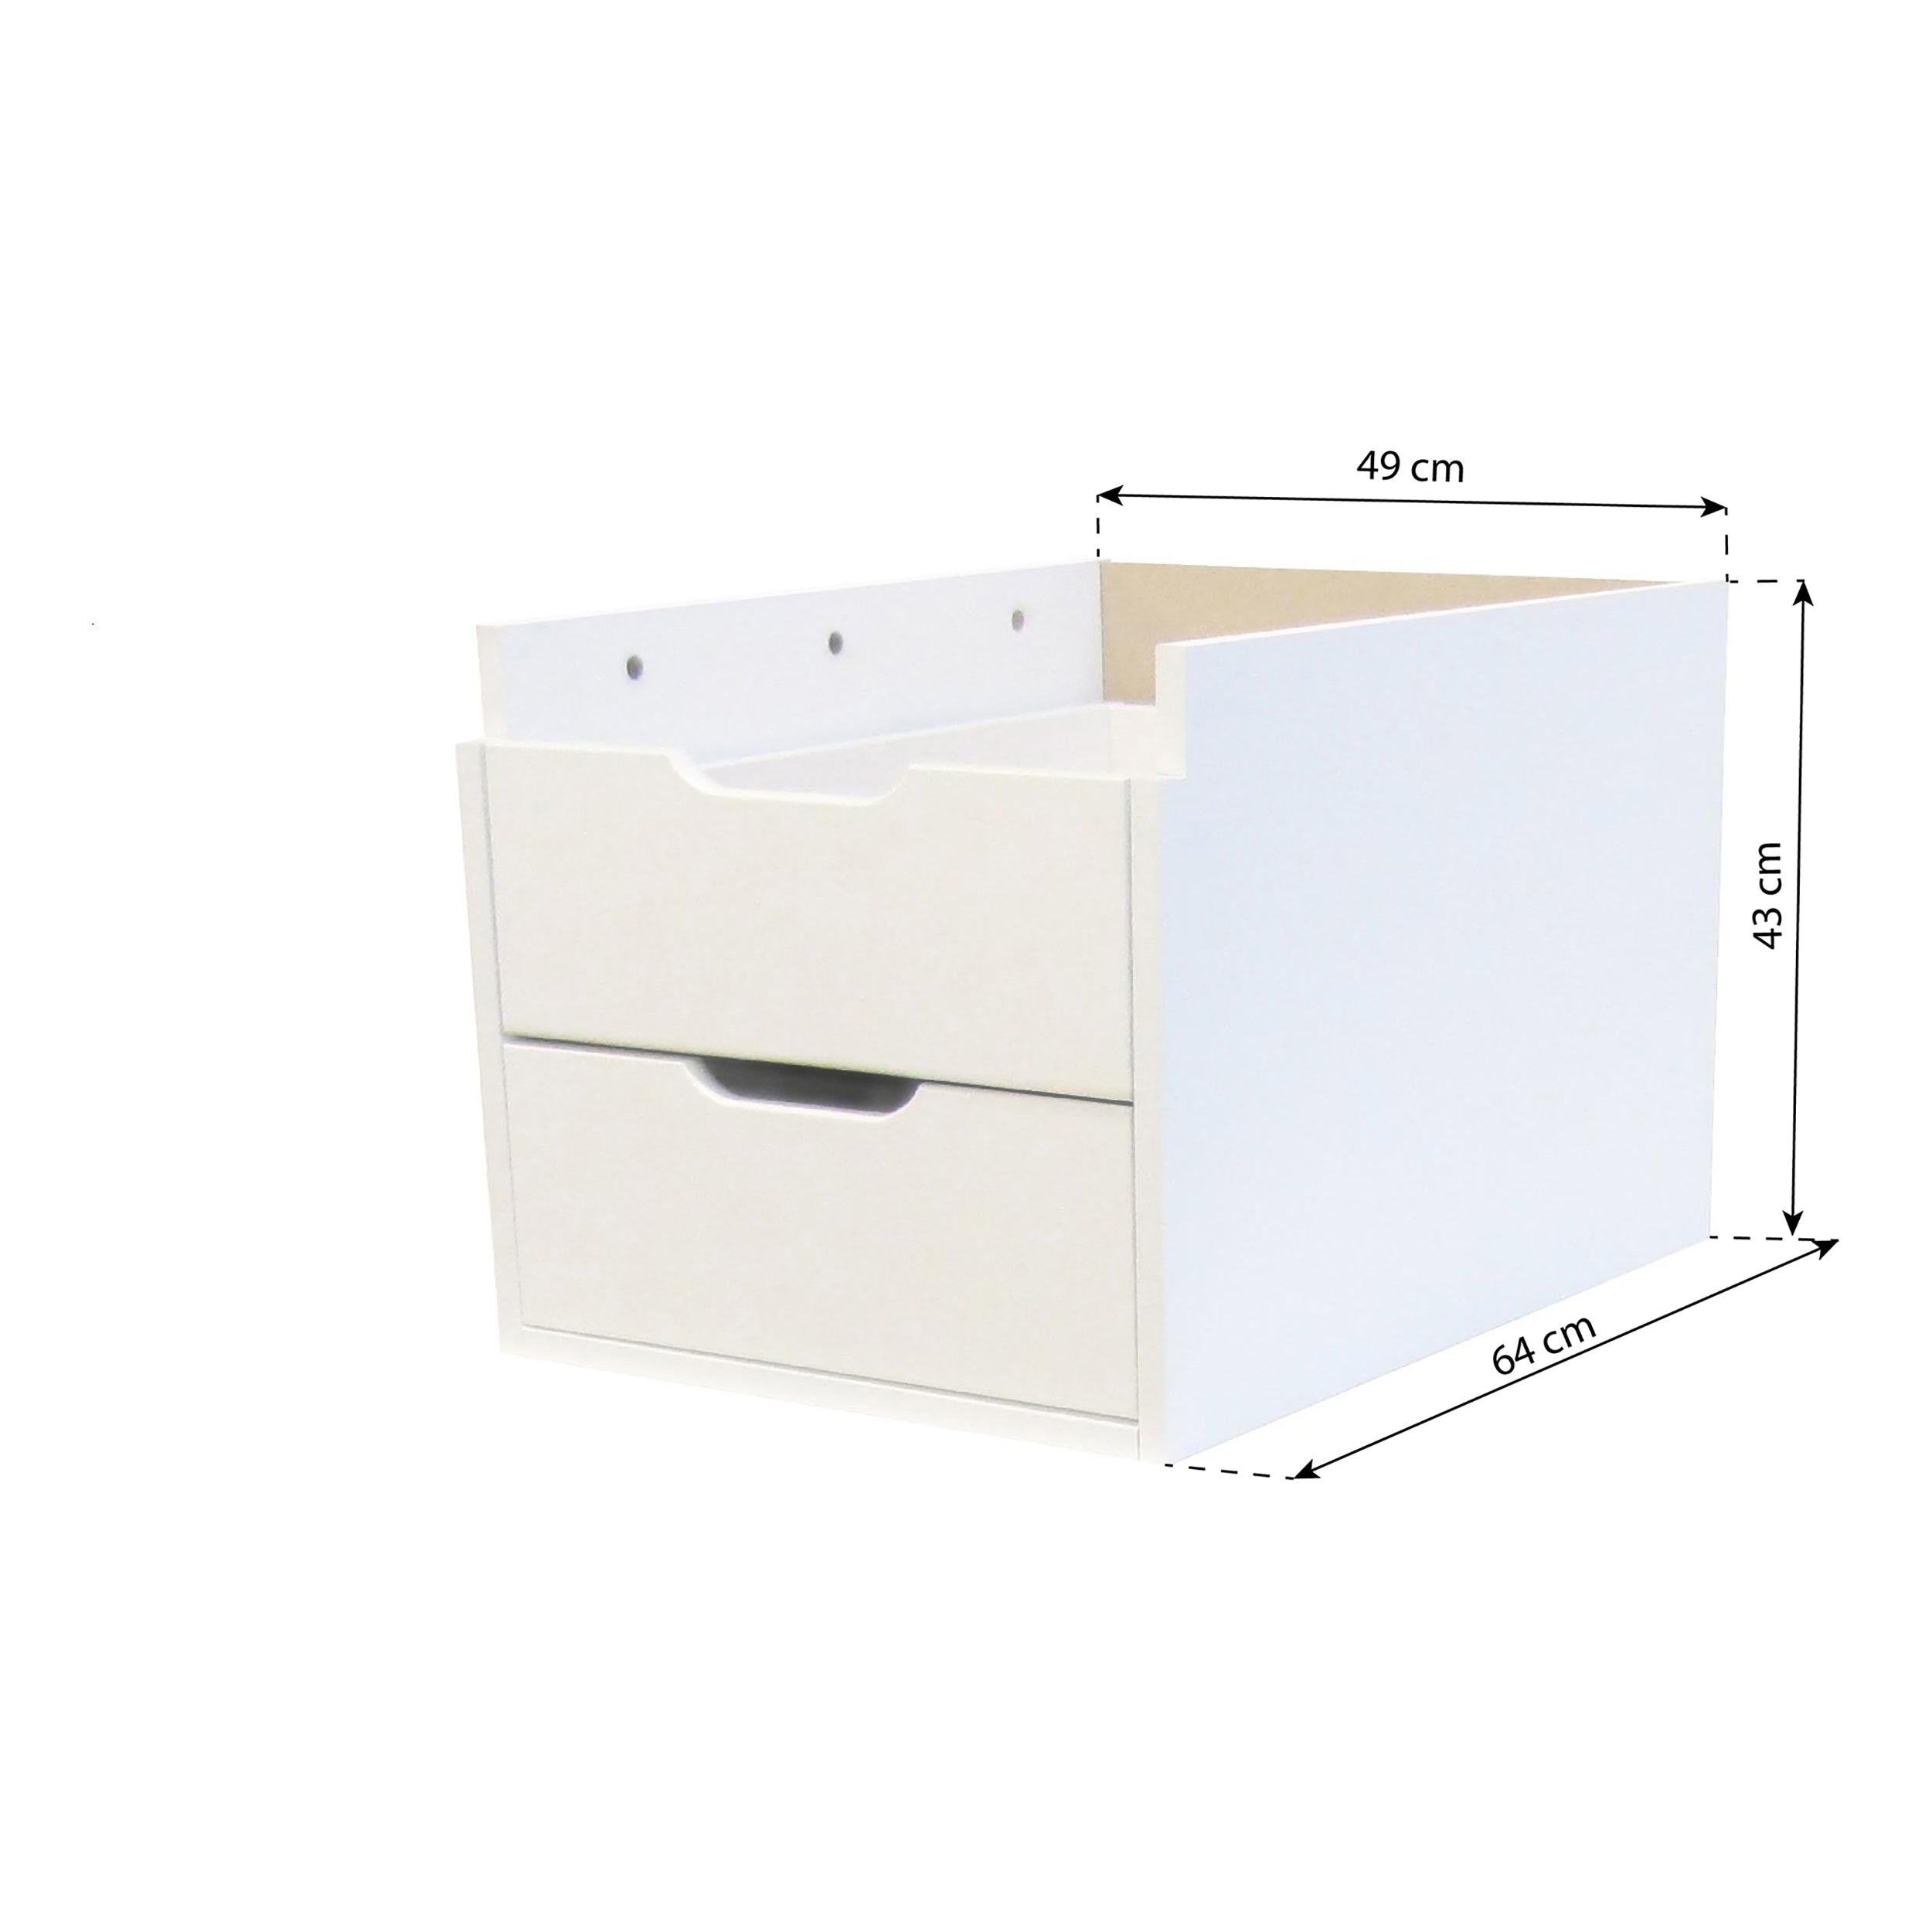 Hoppekids MAJA Drawer Section with 2 drawers